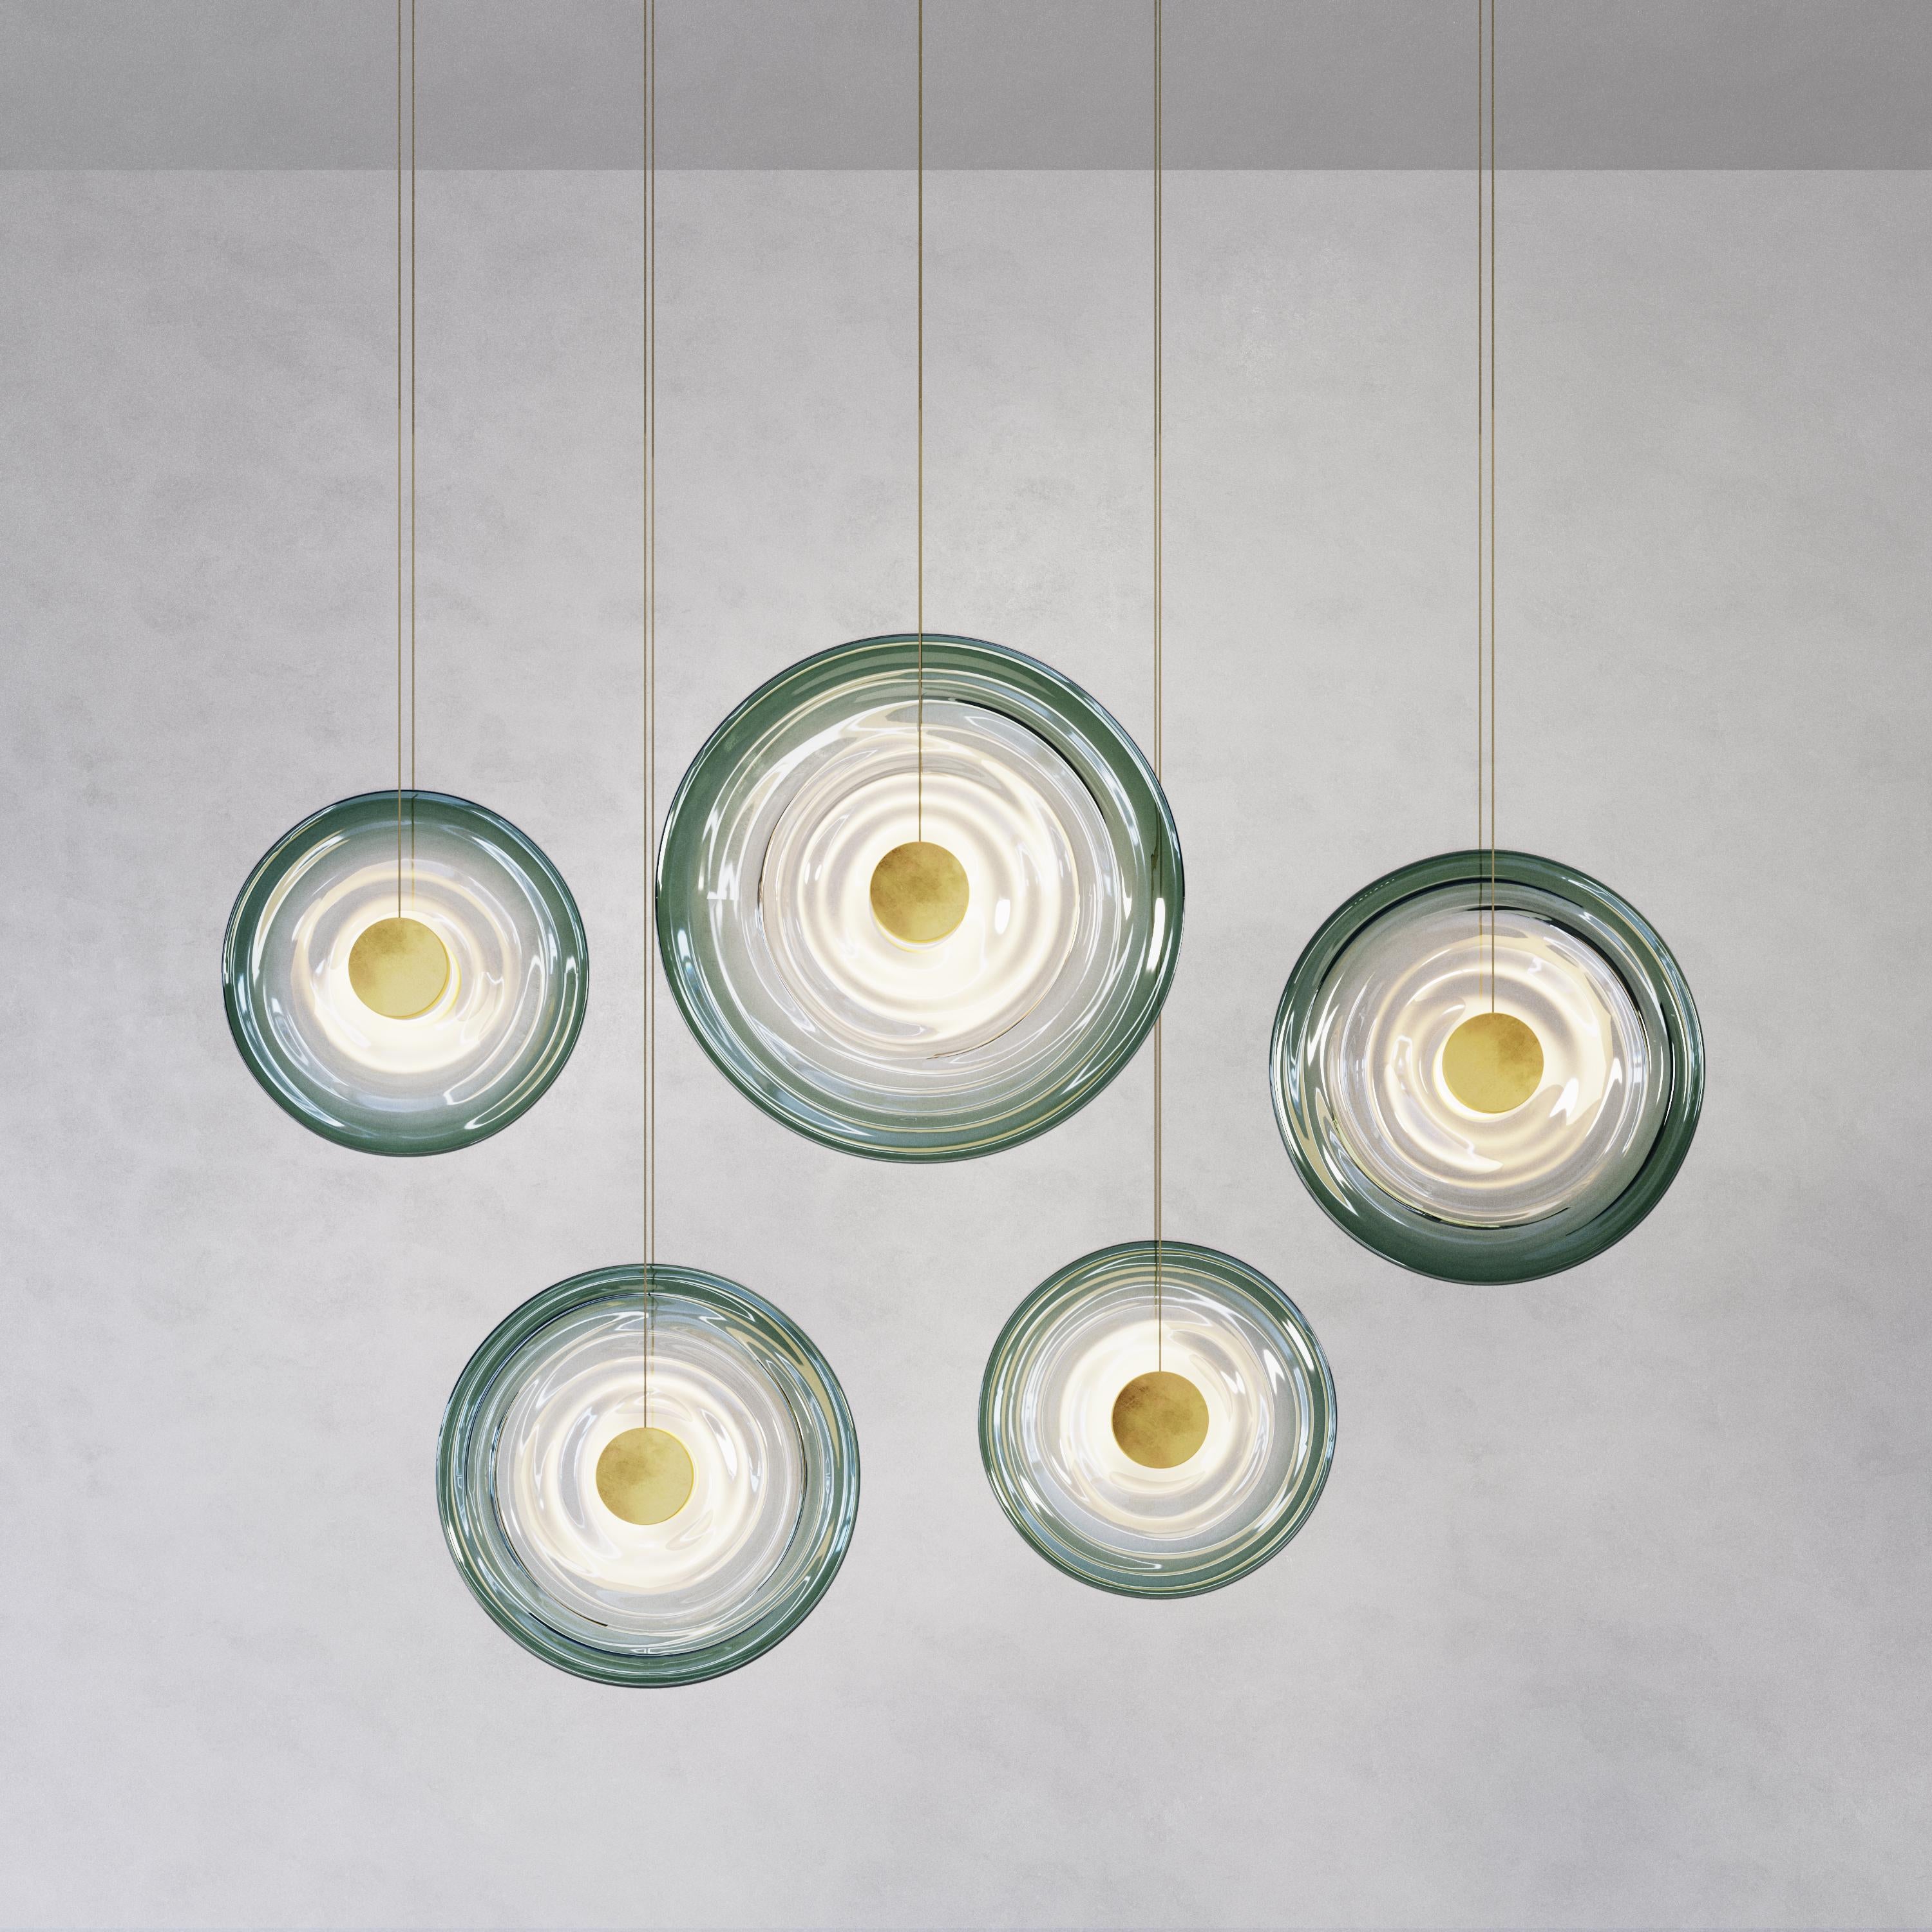 Inspired by water ripples and reflections, each Liquid glass shade is handmade by a London-based master glassblower with decades of experience in glassmaking. Small variations in the shape and edge details are evidence of hand-forming, an authentic,